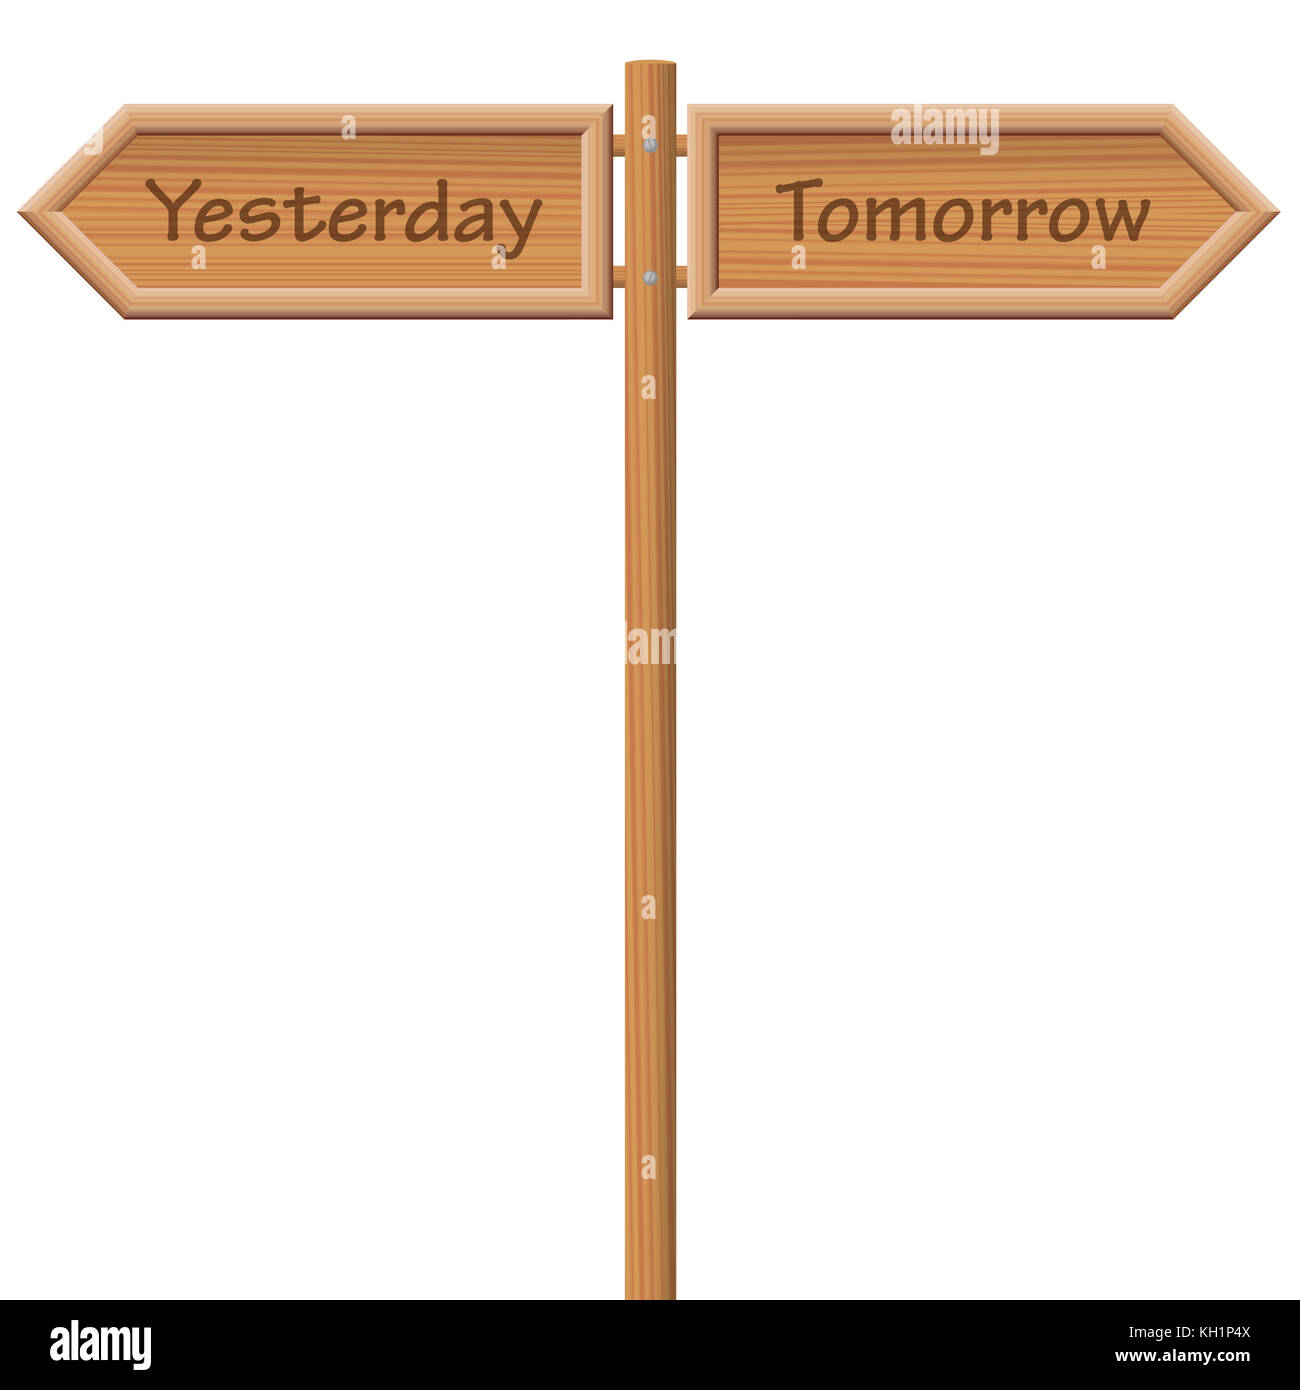 YESTERDAY and TOMORROW, written on two wooden style signposts in opposite direction - symbolic for ancientness and modernity. Stock Photo